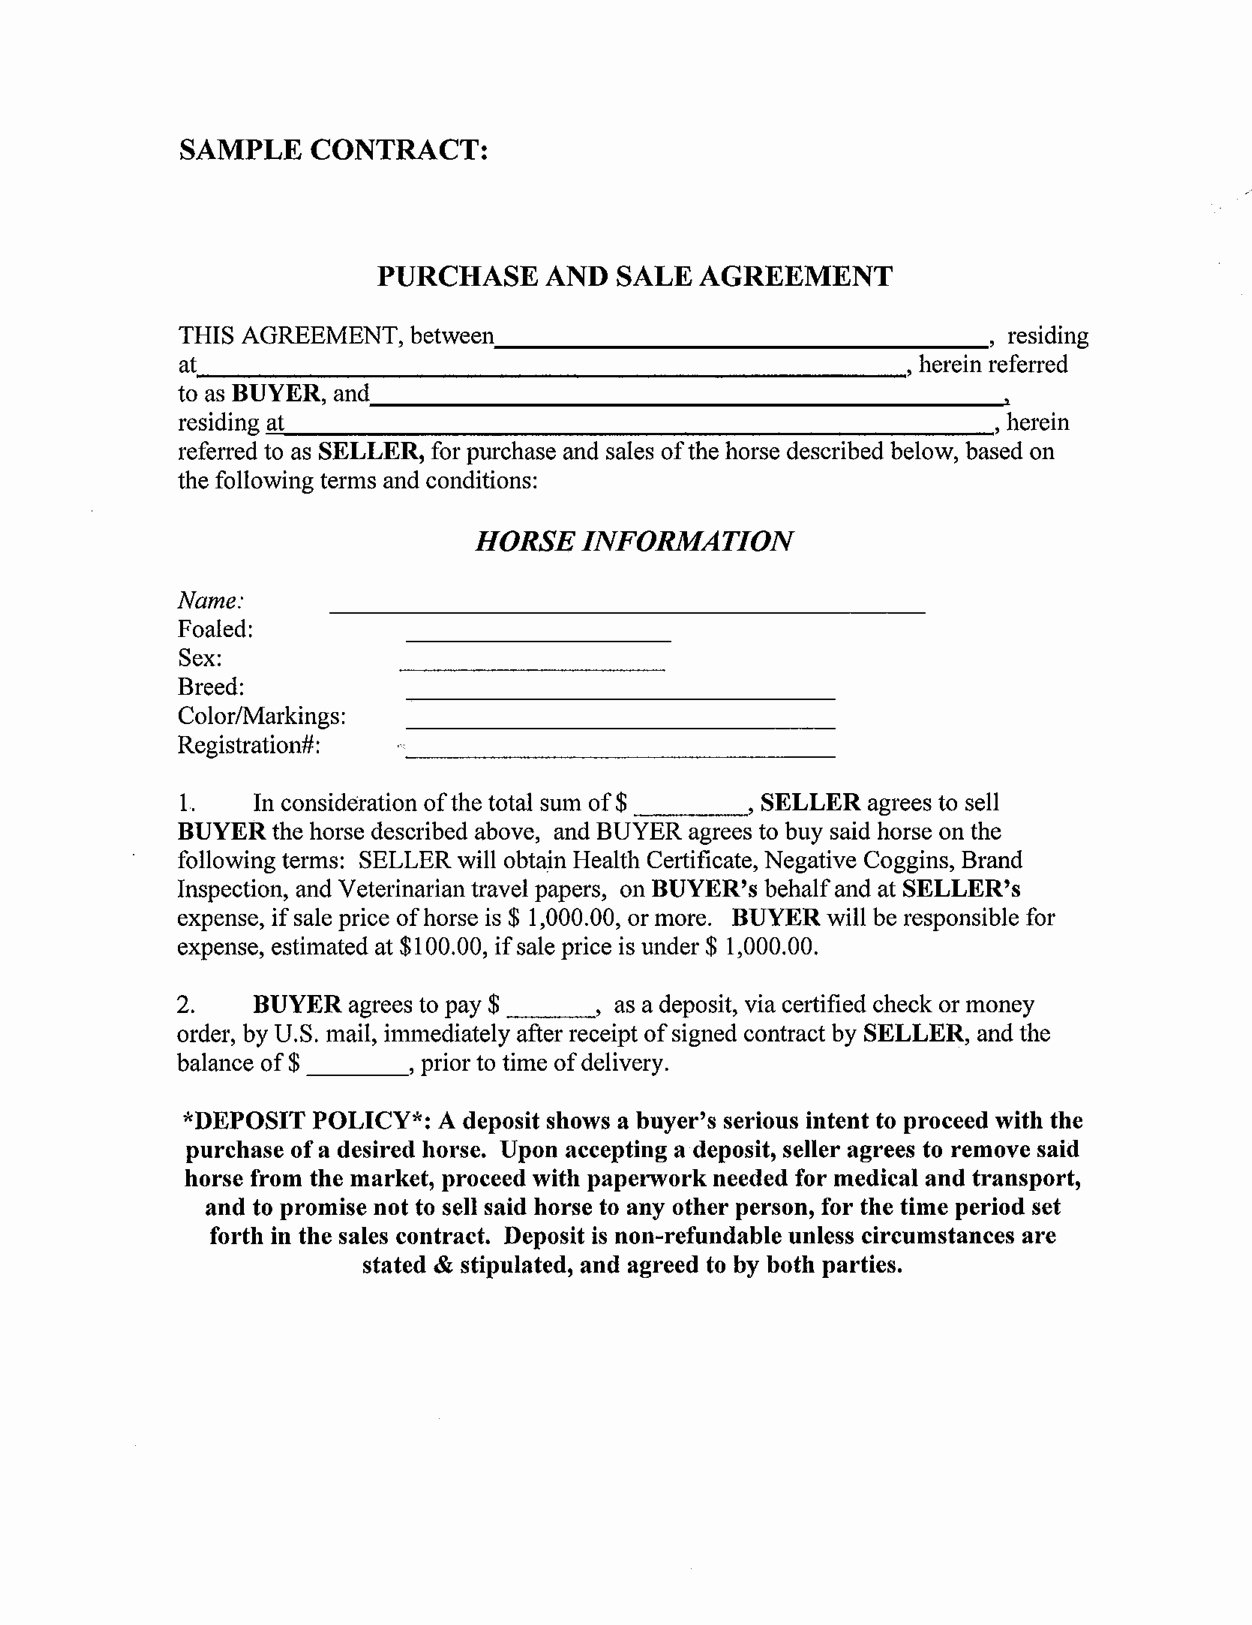 Business Sale Contract Template Beautiful Business Sale and Purchase Agreement Template Plete 10